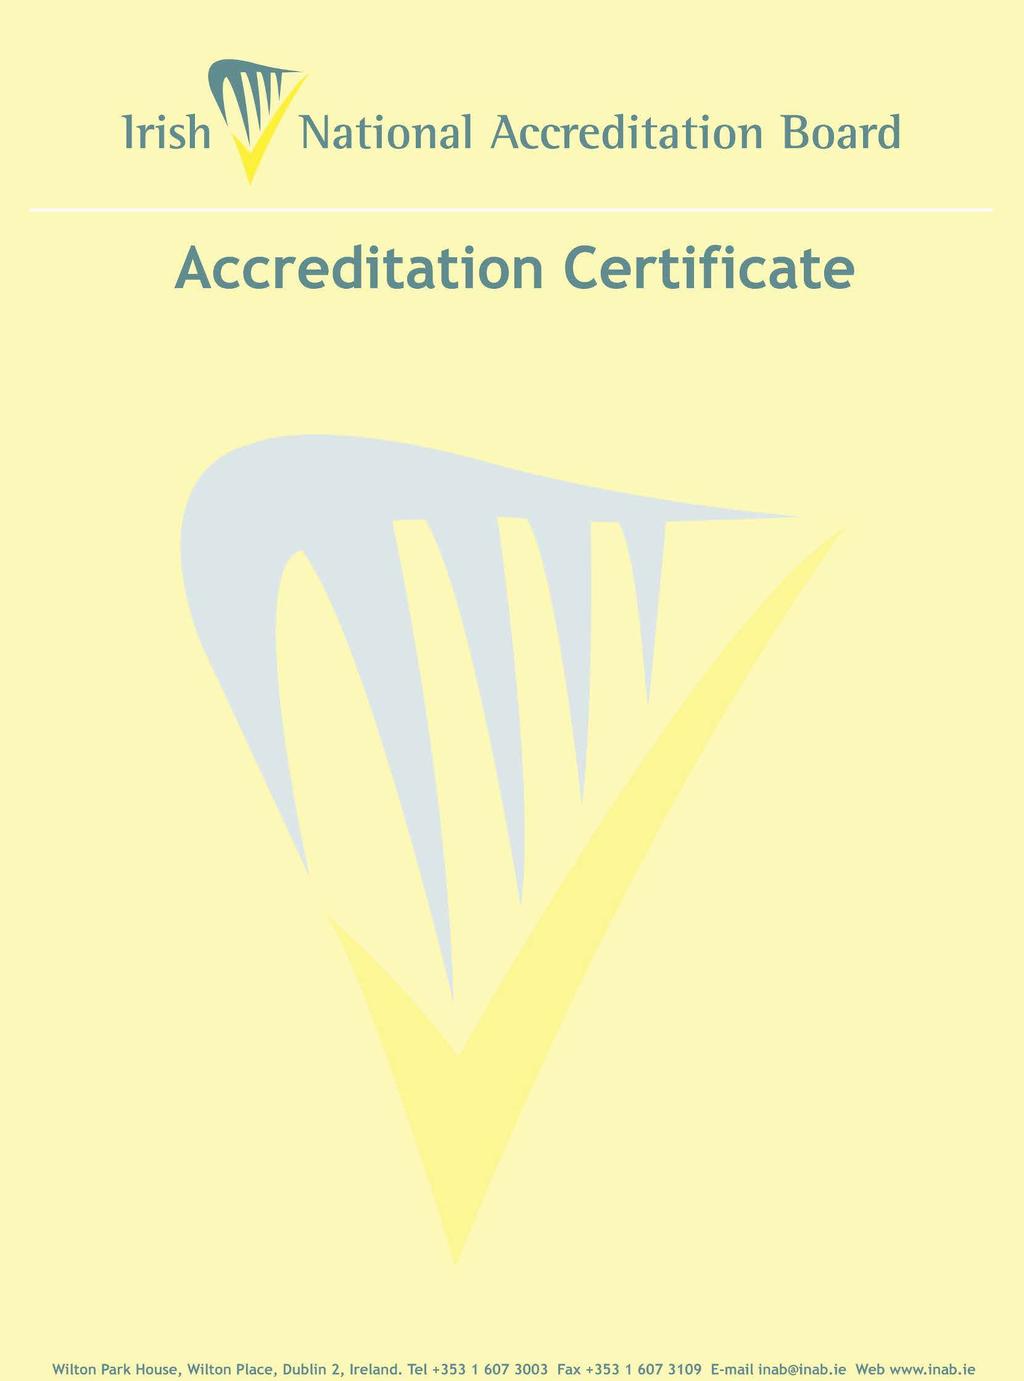 Health Sciences Centre, University College Dublin, Belfield, Dublin 4 Testing Laboratory Registration number: 030T is accredited by the Irish National Board (INAB) to undertake testing as detailed in